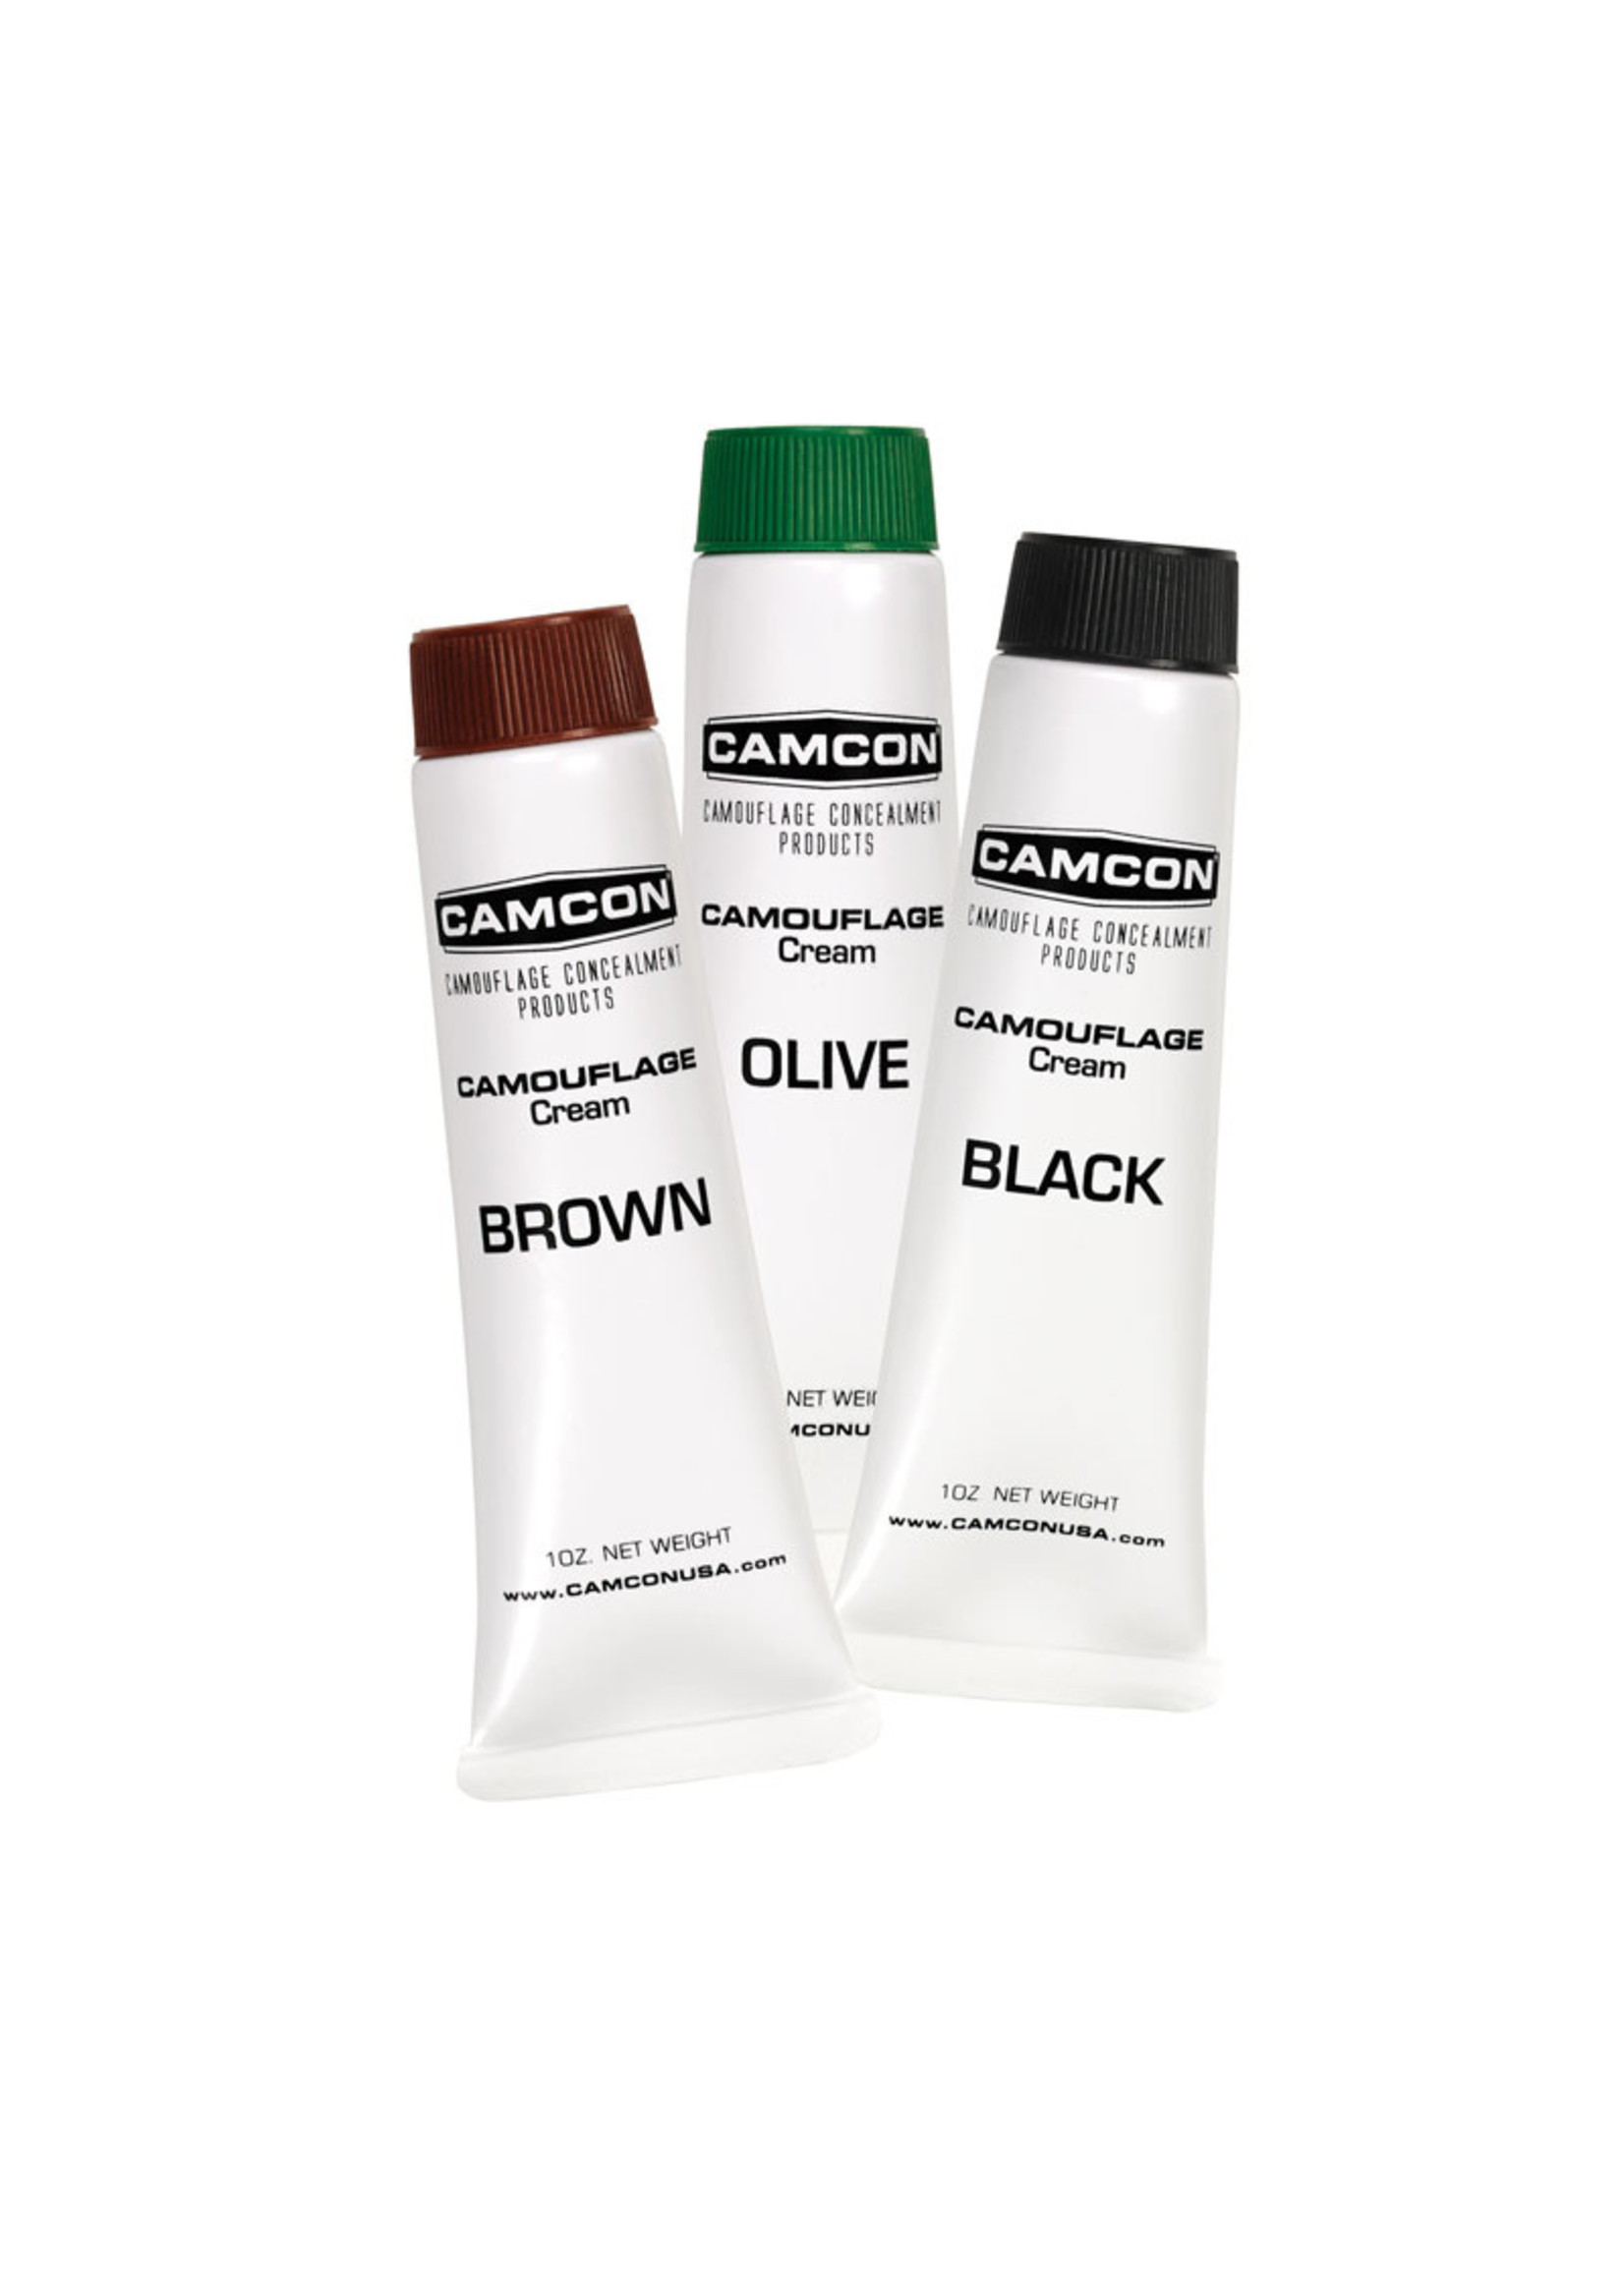 CAMCON CAMOUFLAGE CREAM SQUEEZE TUBE MAKE-UP KIT